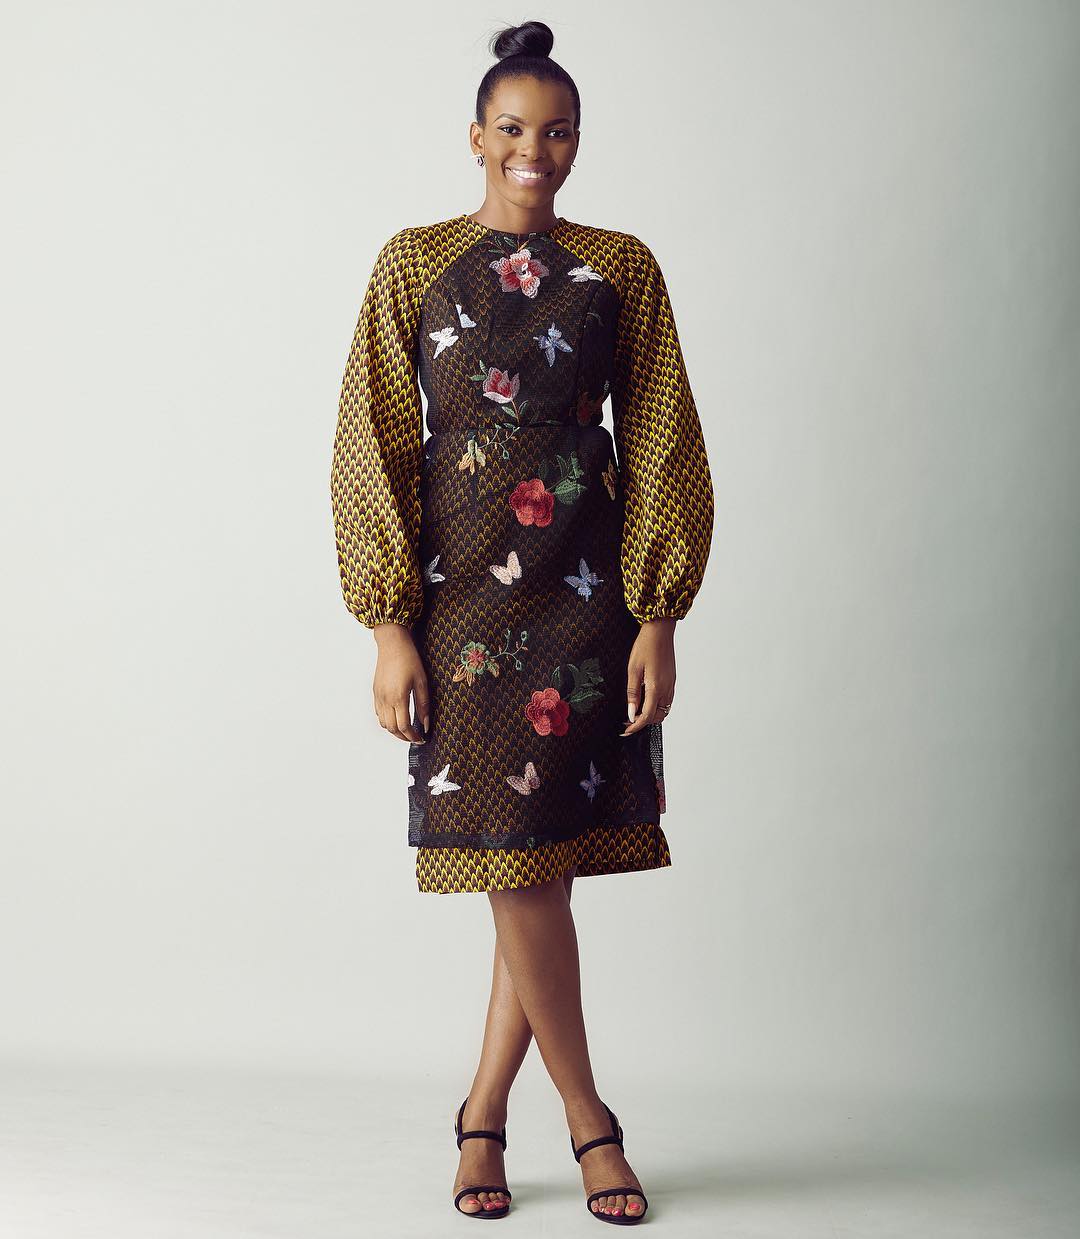 Mix Traditional Prints and Modern Designs - You'll Get Christie Brown's ...